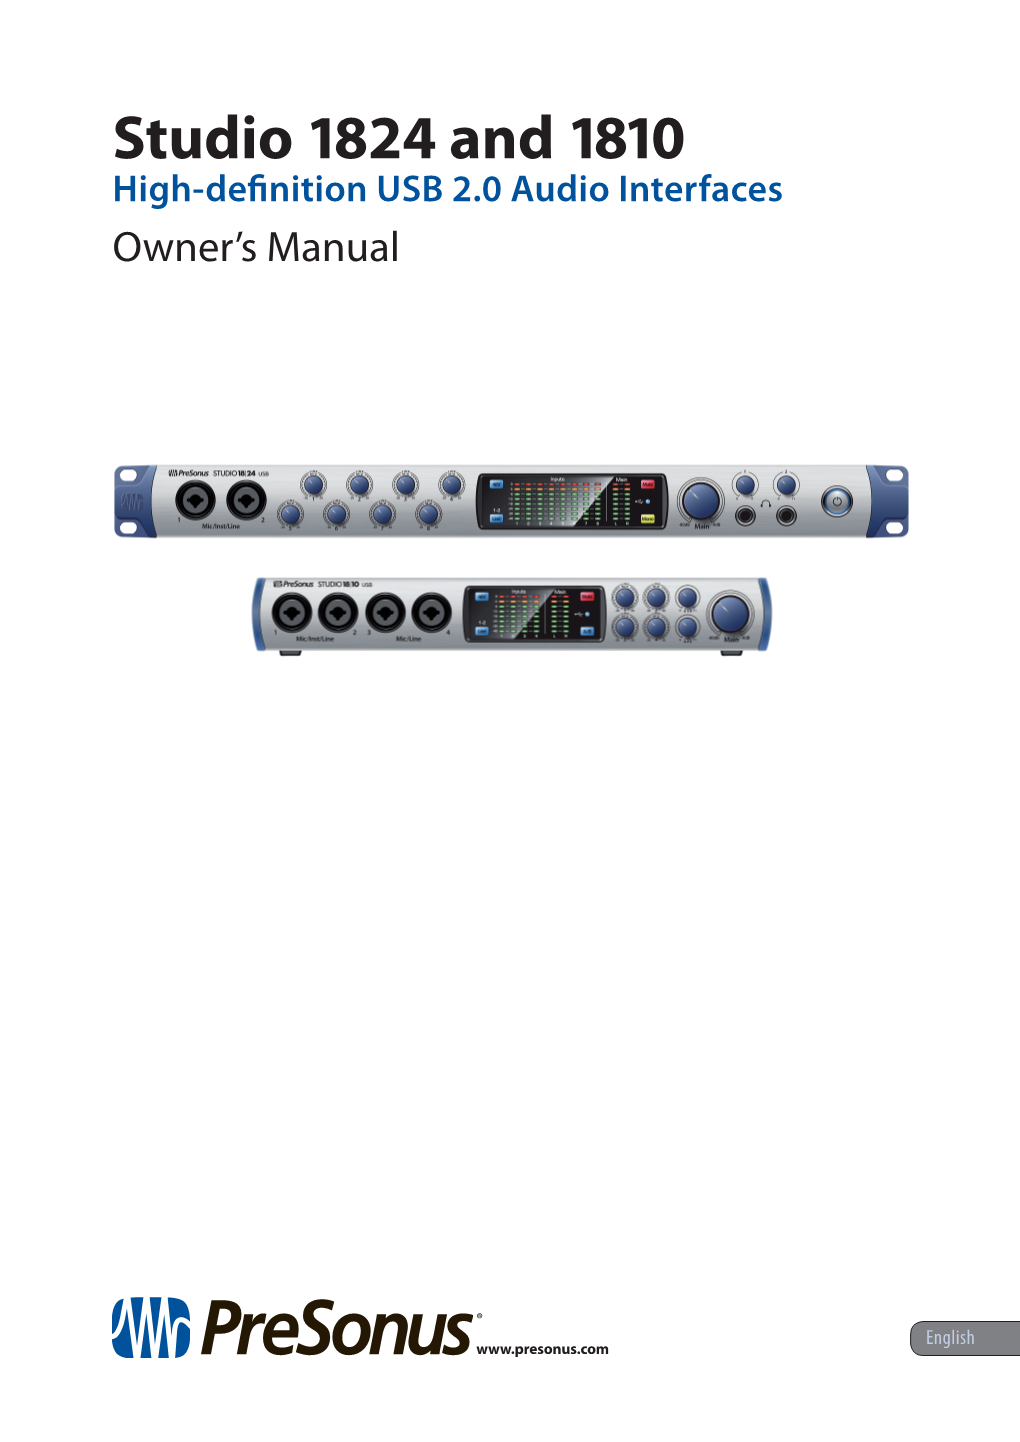 Studio 1824 and 1810 High-Definition USB 2.0 Audio Interfaces Owner’S Manual